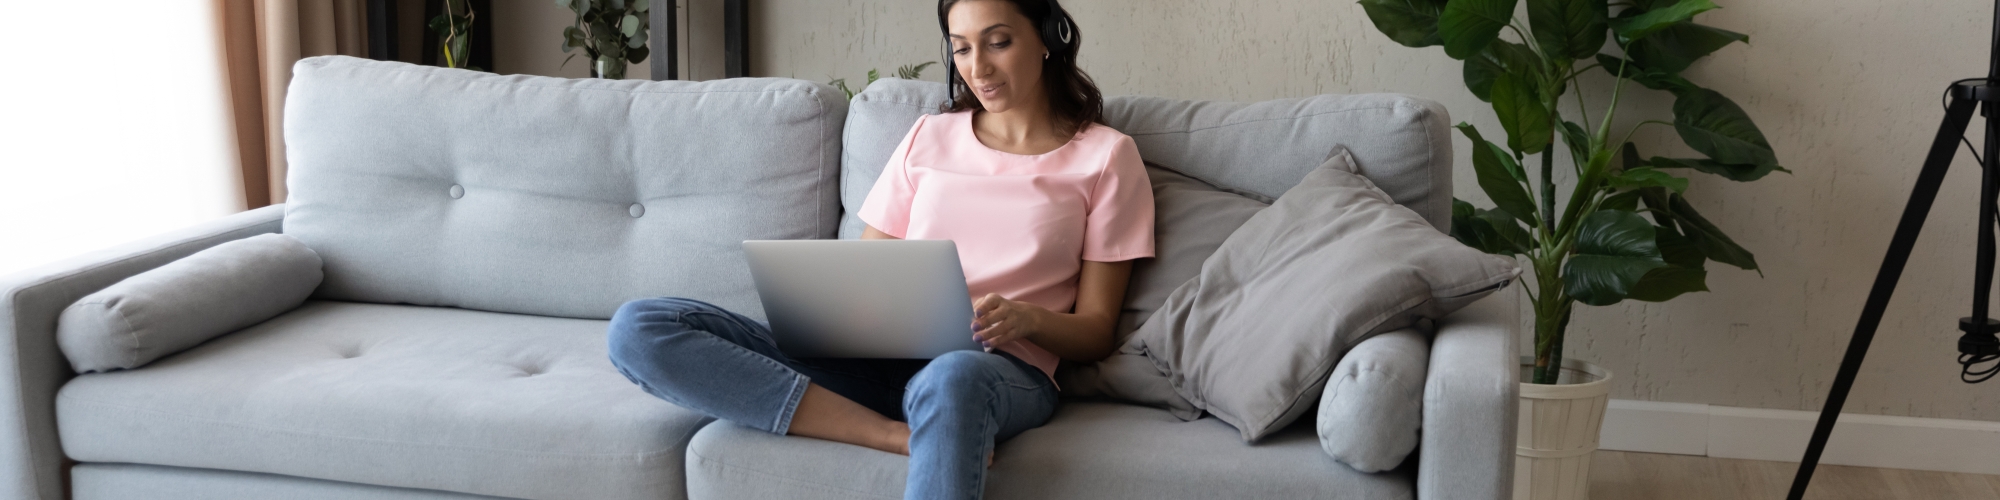 woman sitting on the couch with a laptop and headphones